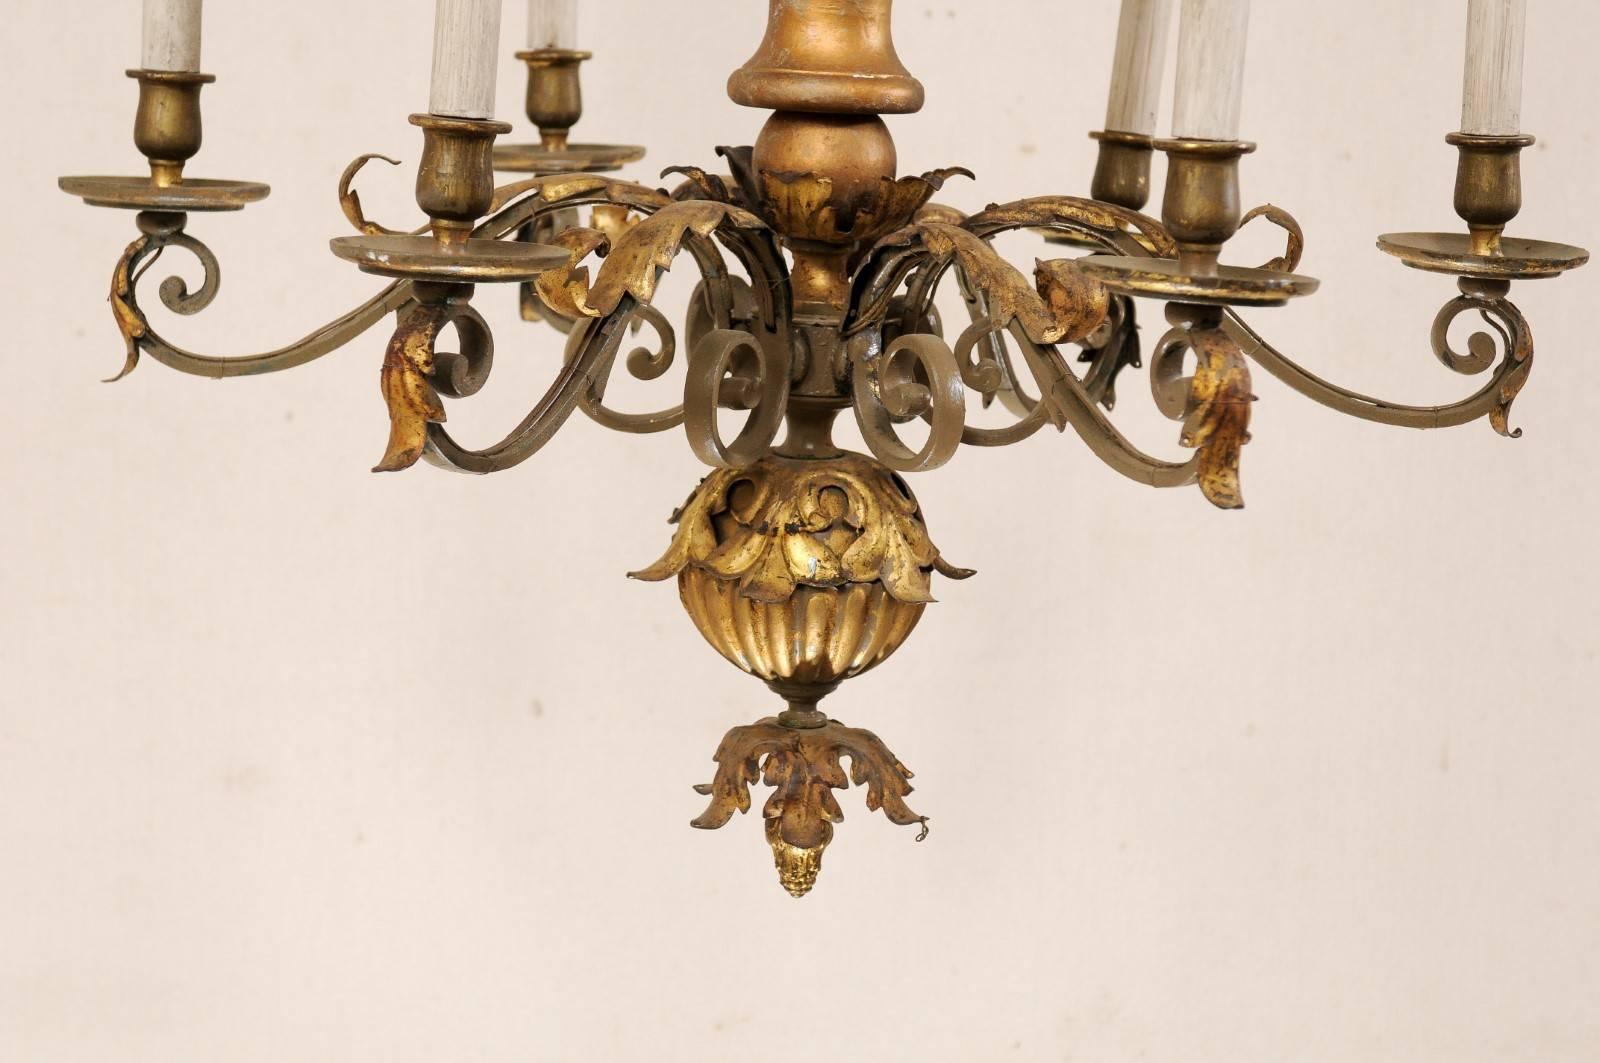 An Italian Acanthus-Carved Wood Column Chandelier w/Six Scrolled Metal Arms  4